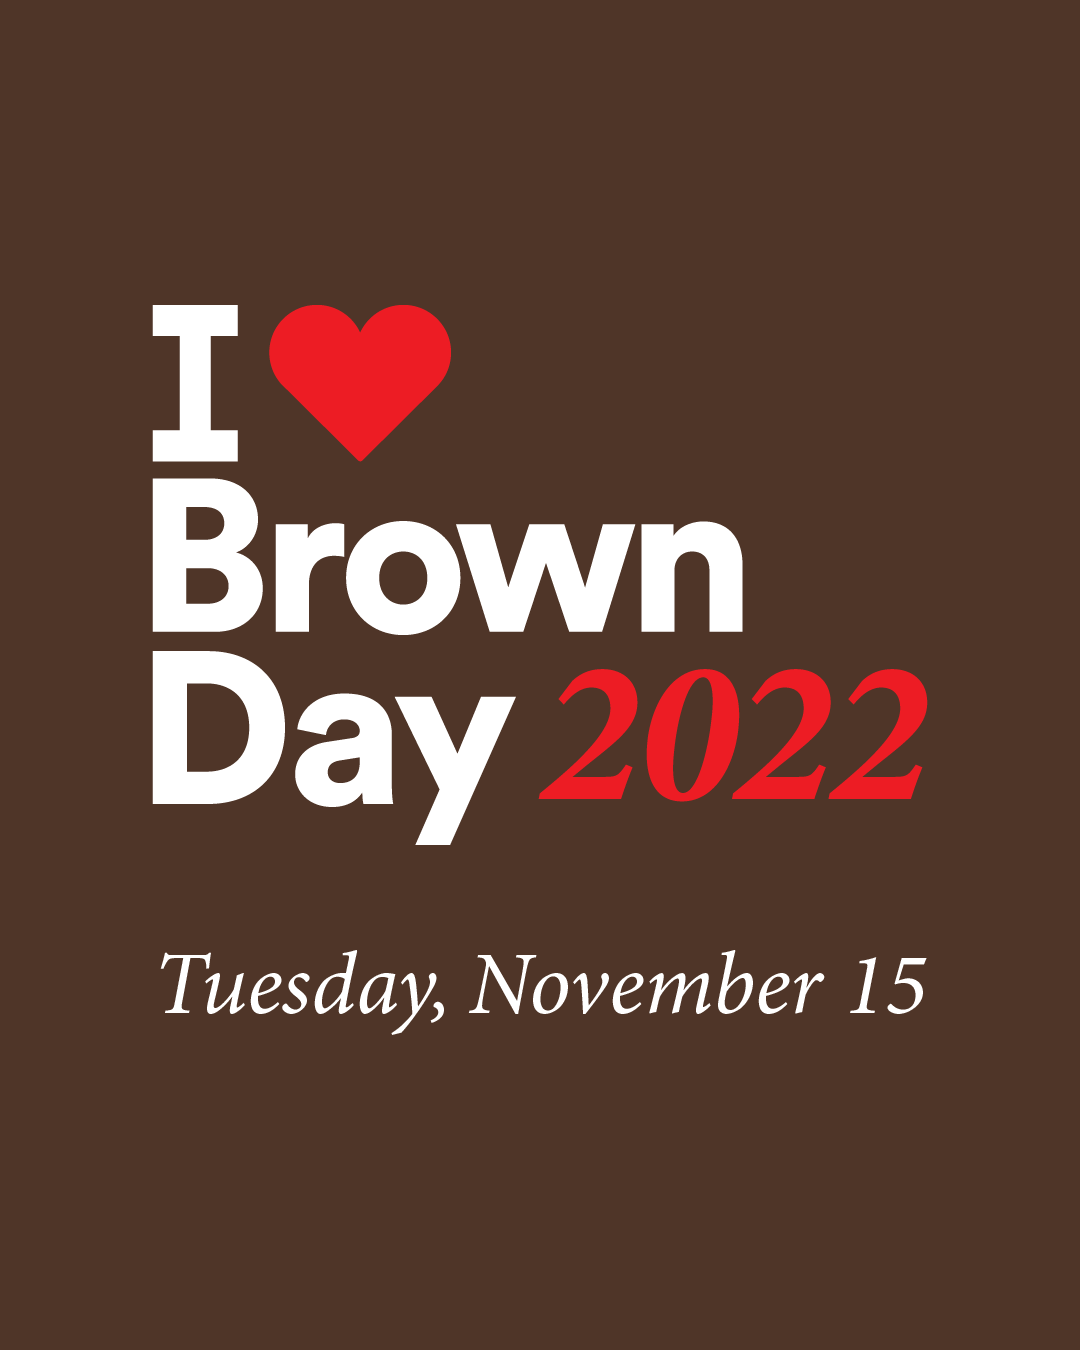 I Heart Brown Day logo in white and red on a brown background, with text reading November 15 below